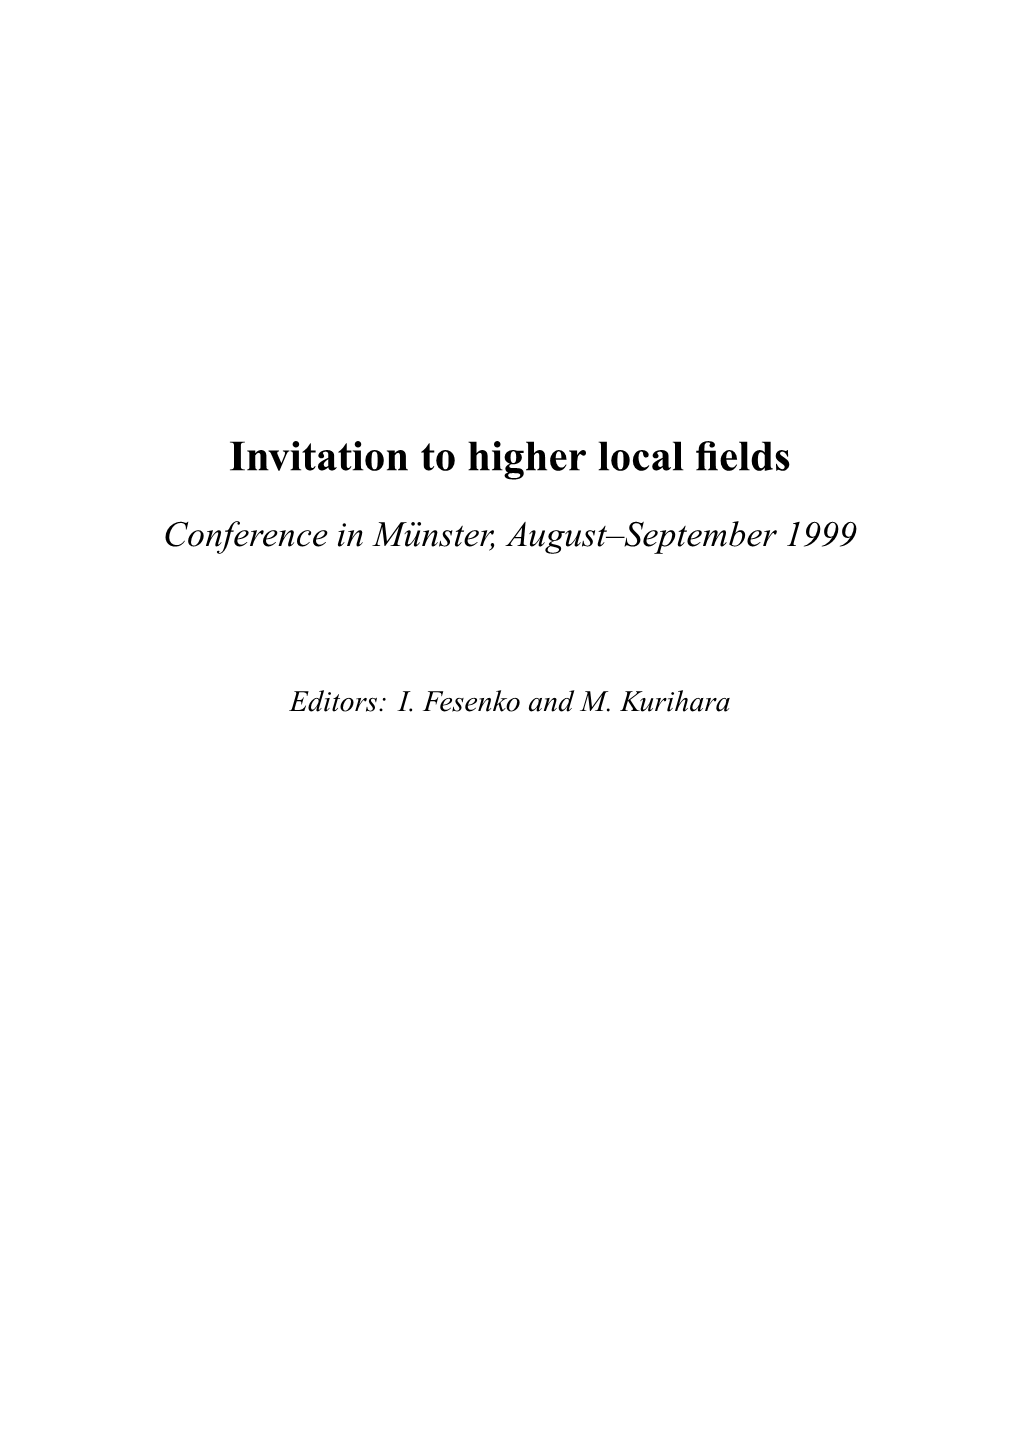 Invitation to Higher Local Fields